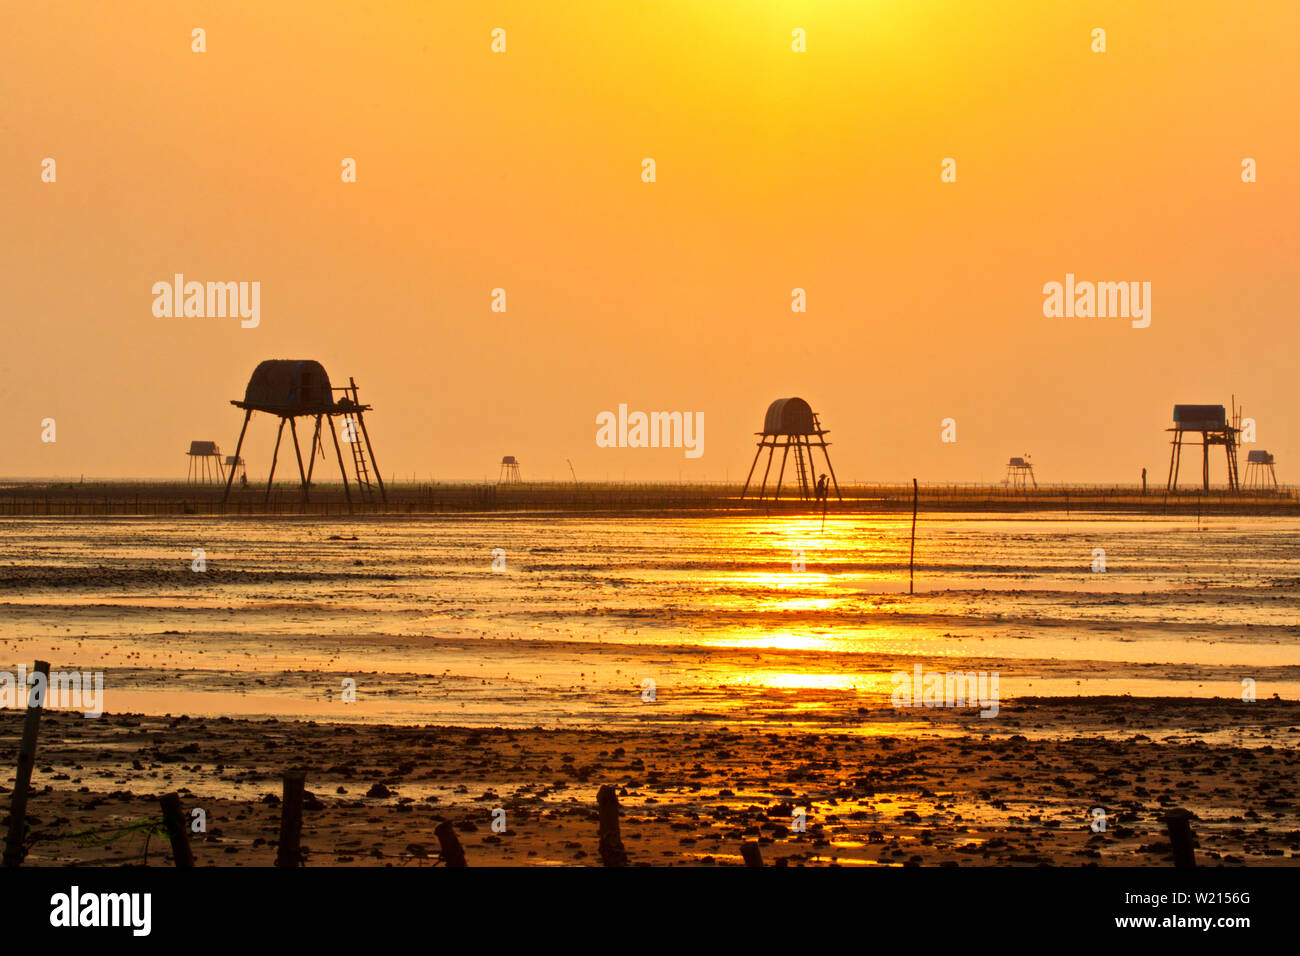 Sunset over Dong Chau beach in Thai Binh, Vietnam. This is a large farm for aquaculture, especially clams. Stock Photo